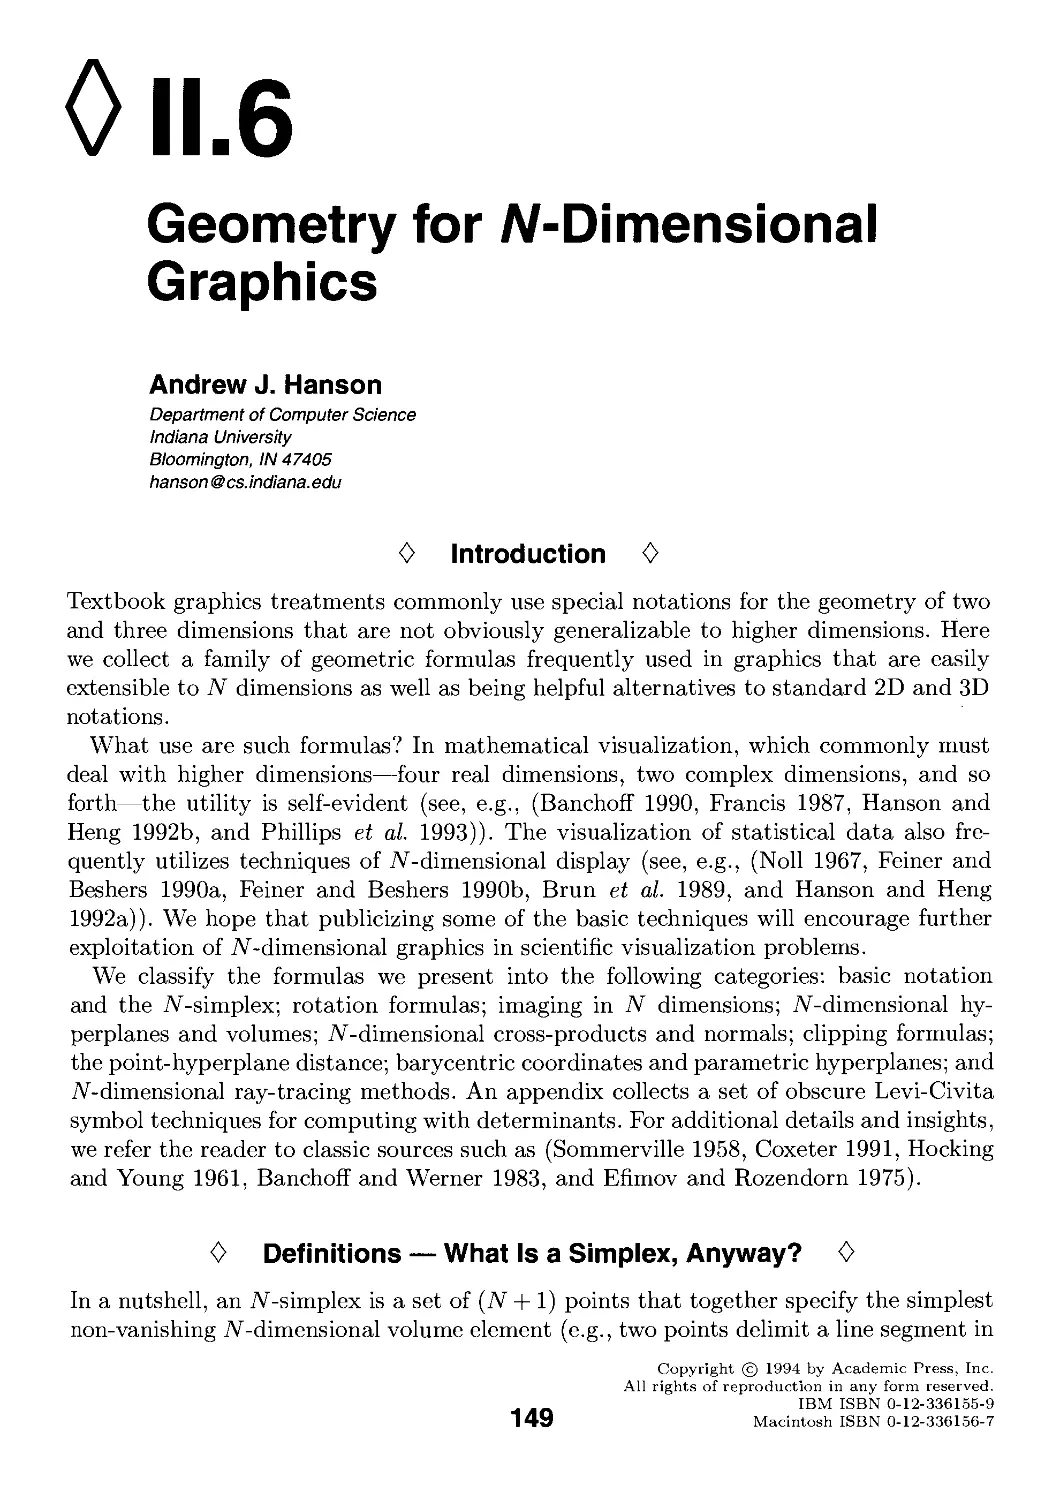 II.6. Geometry for A/-Dimensional Graphics by Andrew J. Hanson